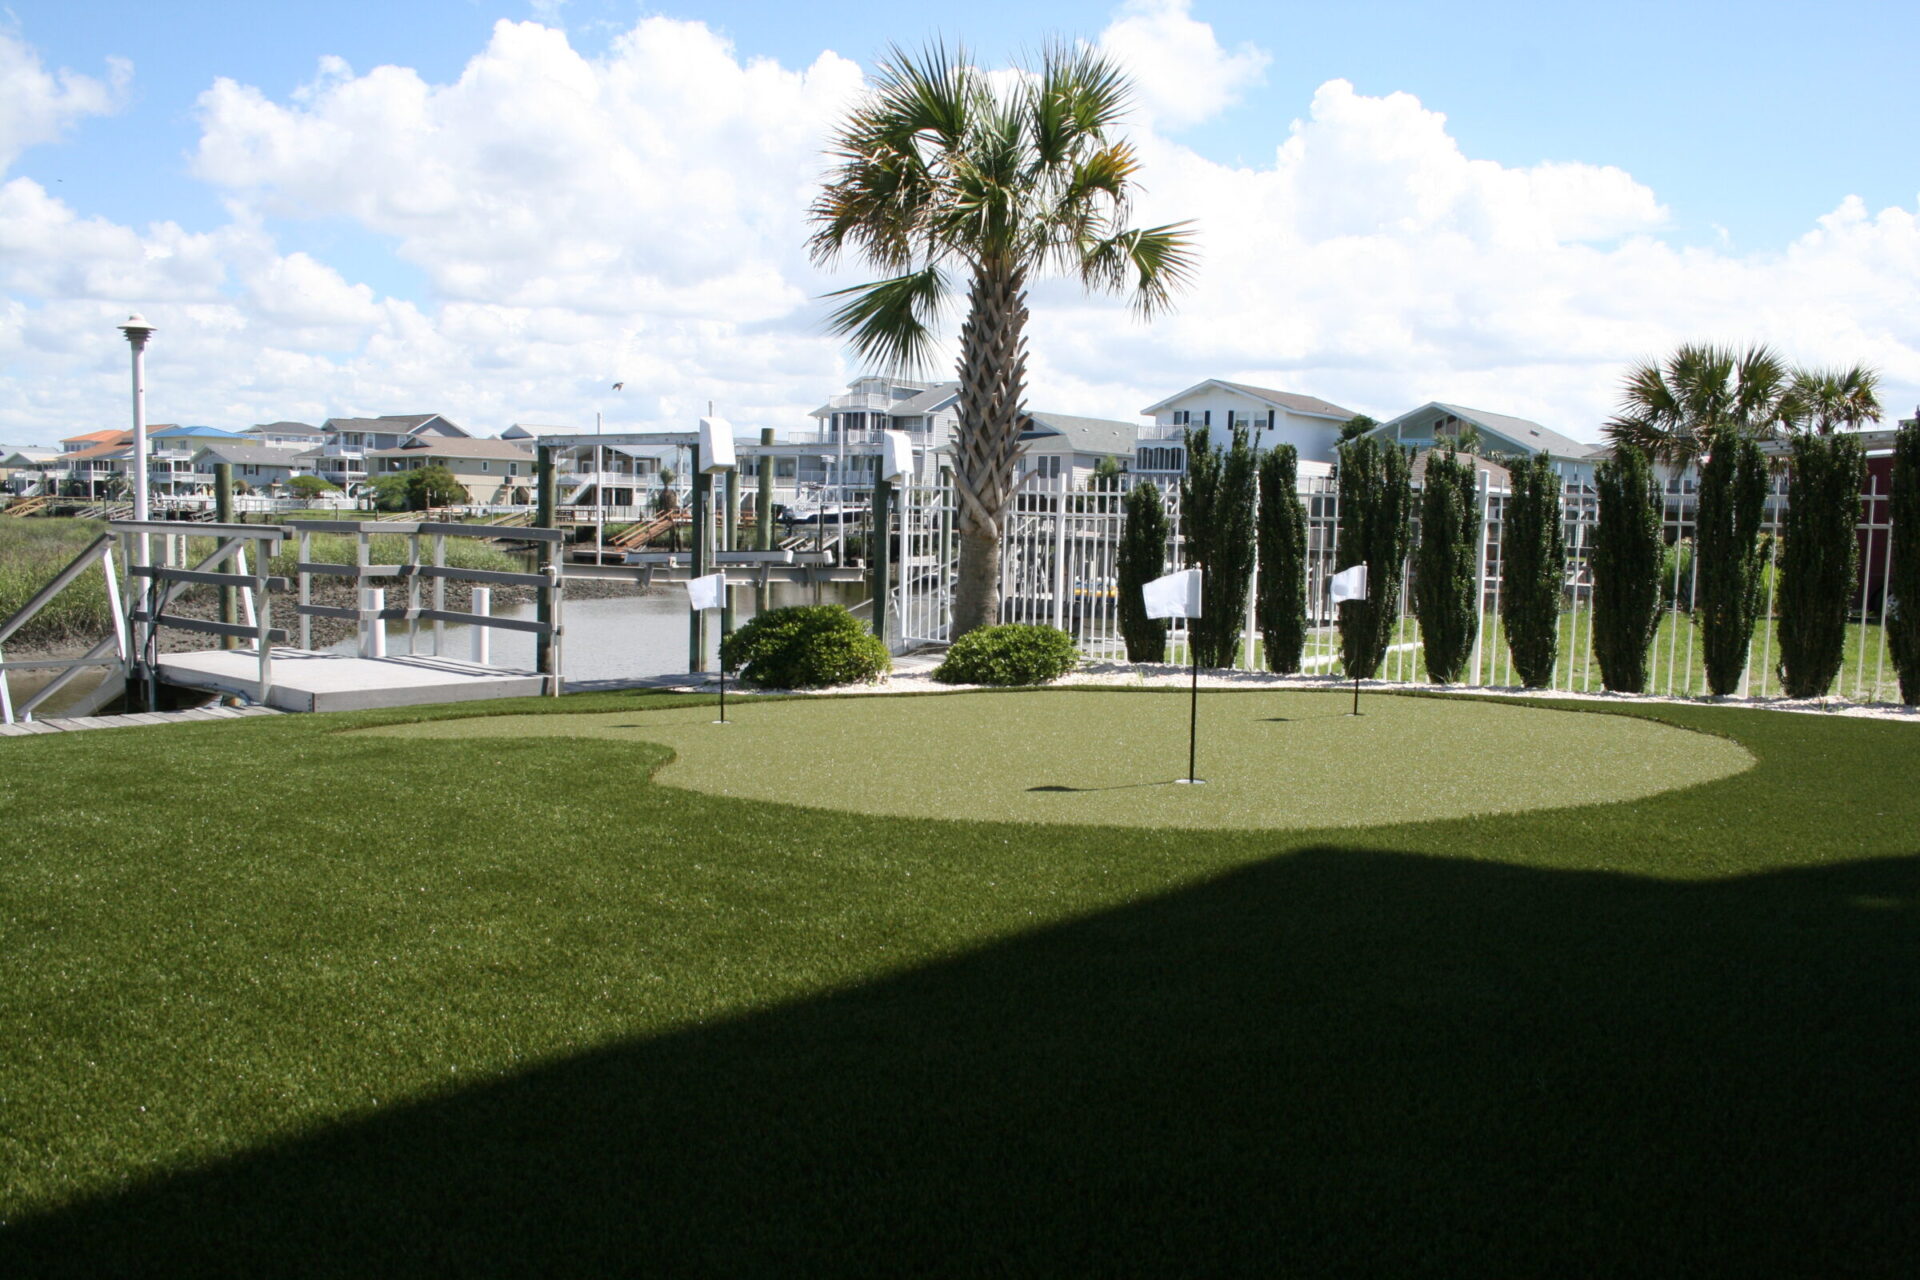 This is a well-manicured artificial putting green surrounded by a white fence and tall, thin trees, with a palm tree and residential area nearby.